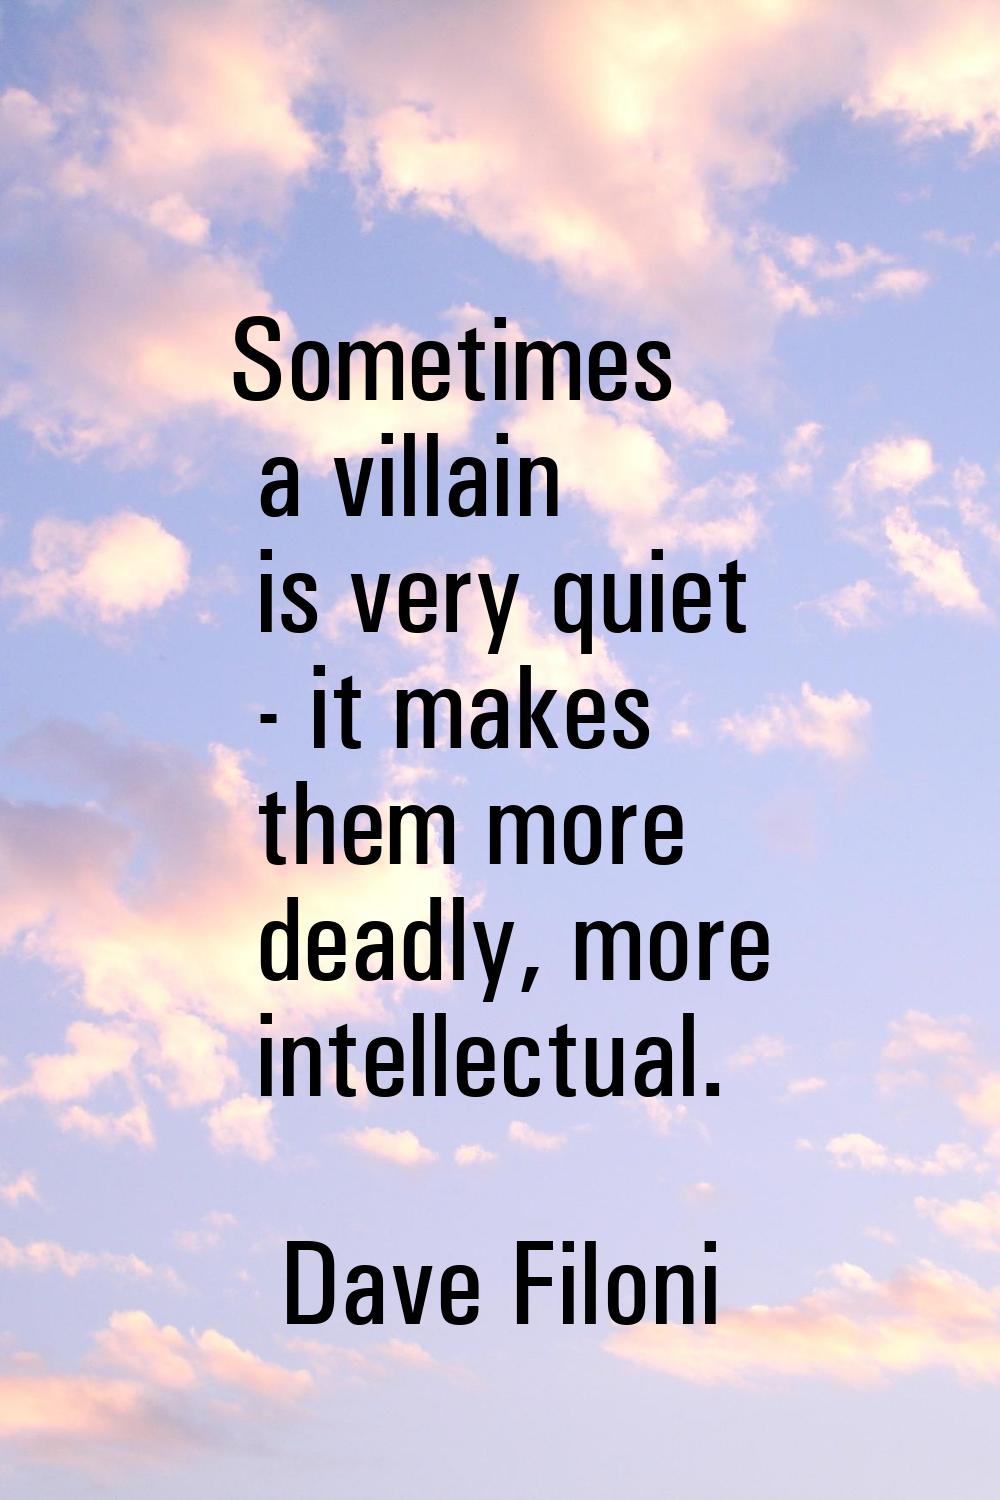 Sometimes a villain is very quiet - it makes them more deadly, more intellectual.